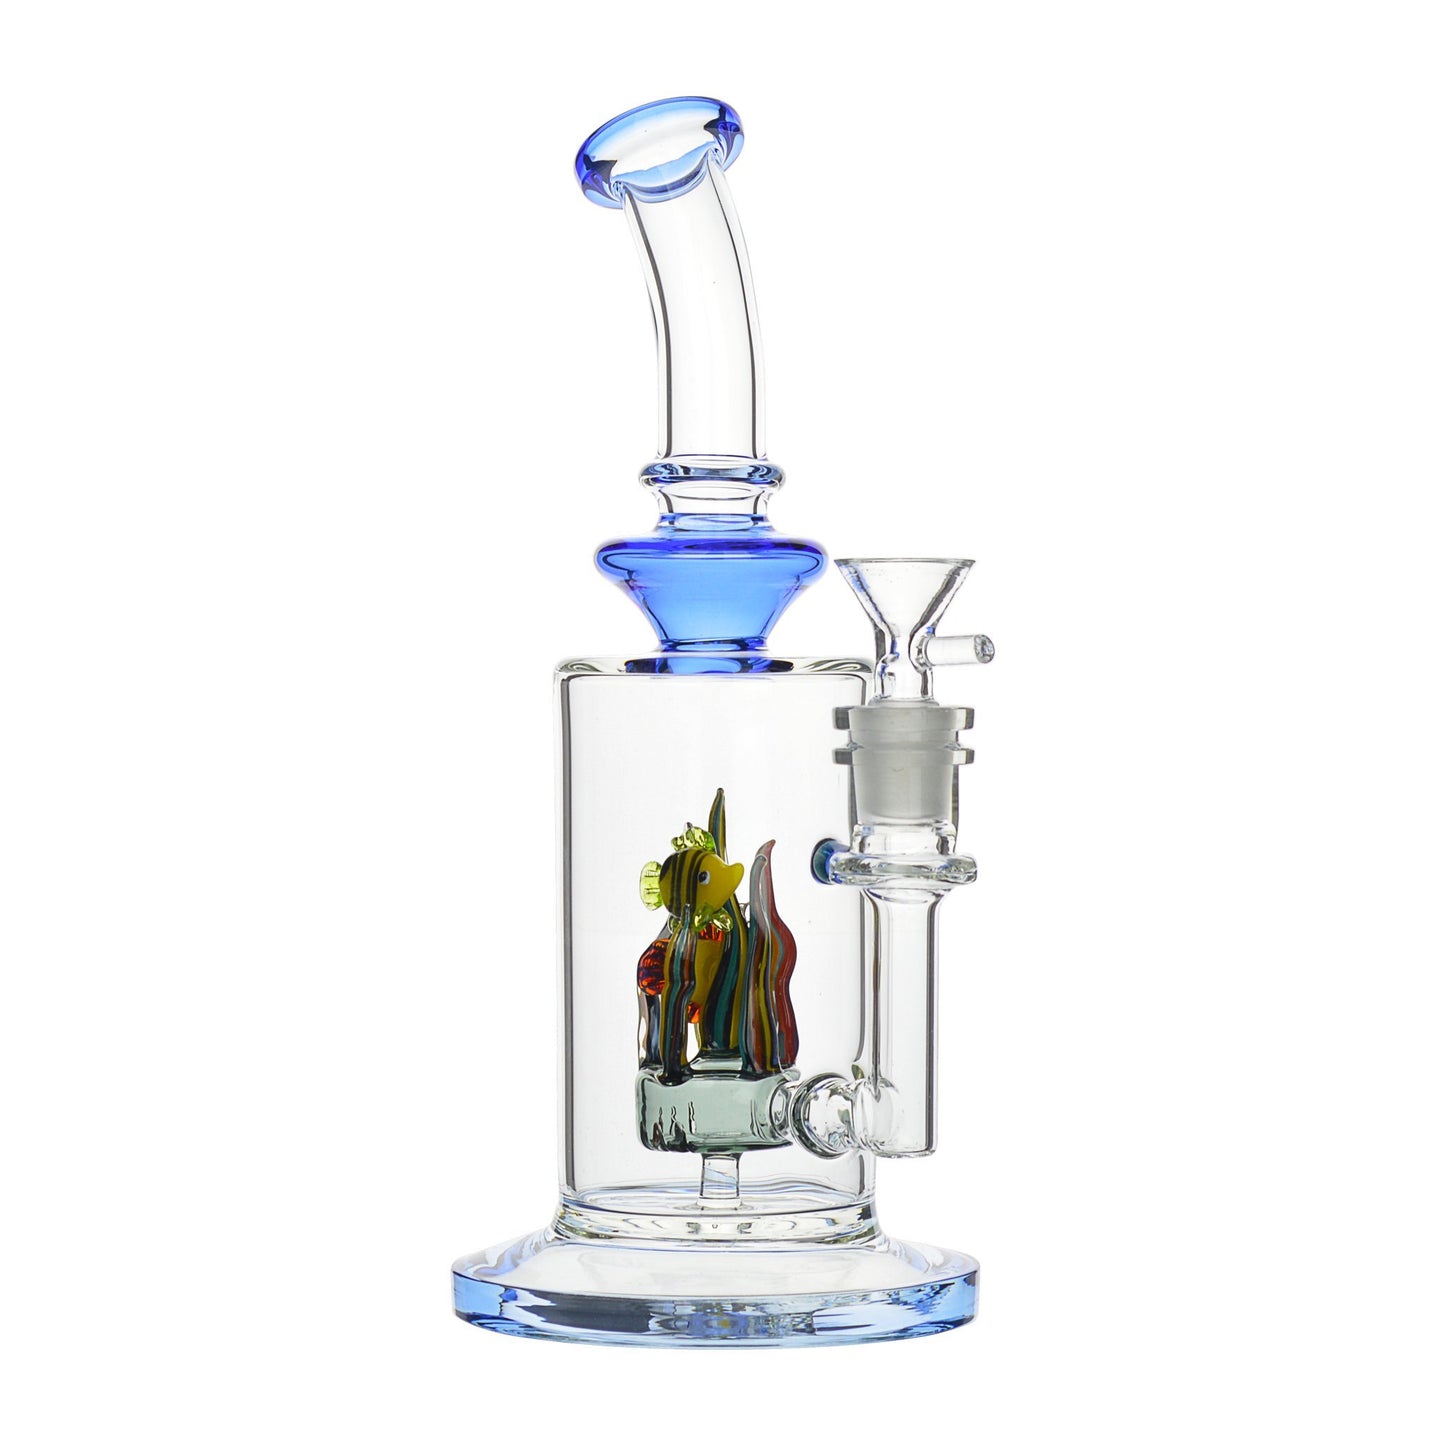 9.5-inch clear glass bong smoking device splash guards cone bowl with handle fish figures inside an aquarium look